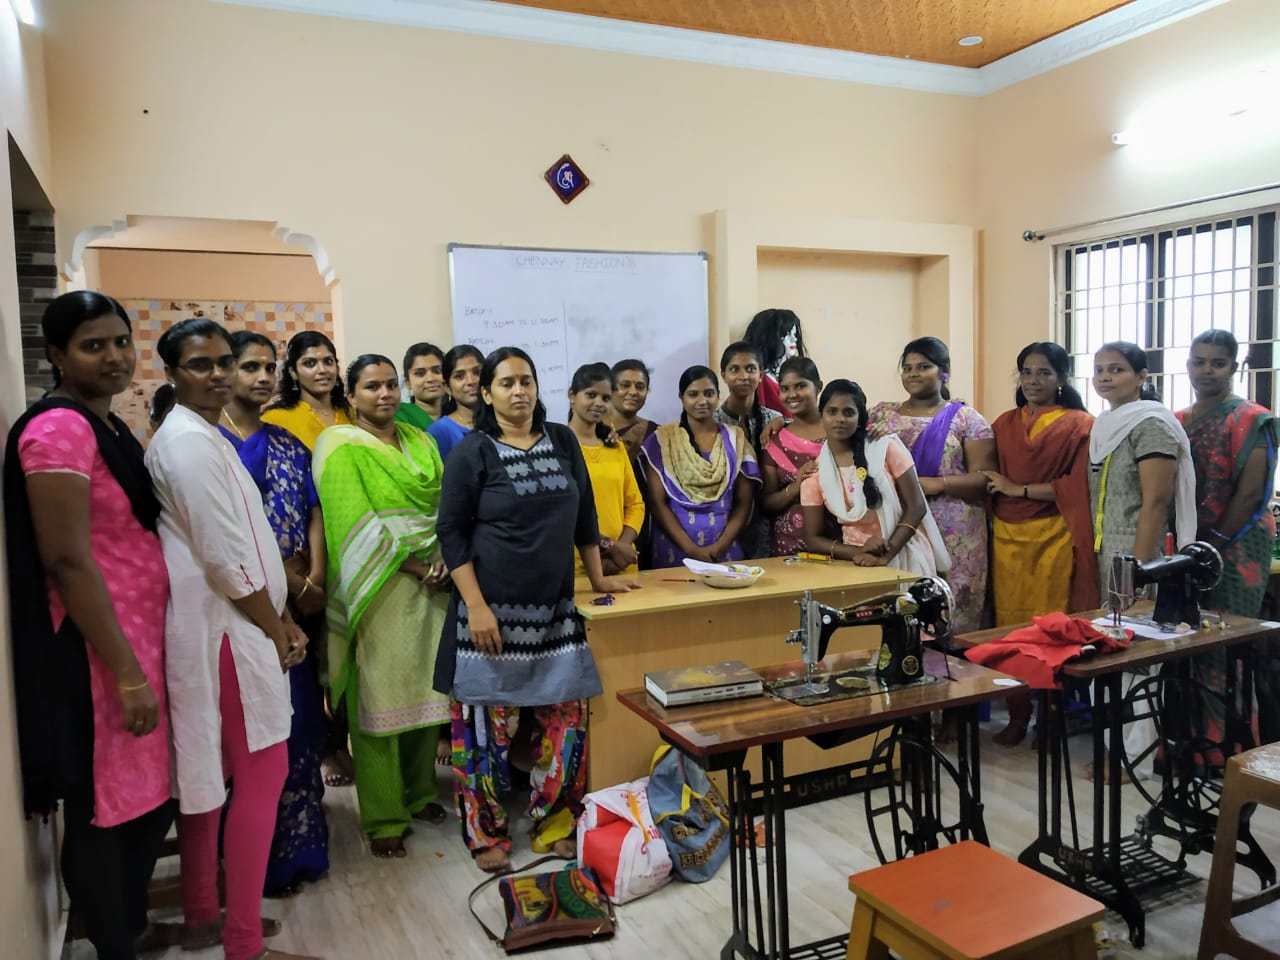 Top Ranking tailoring Institute in Chennai: Chennay fashion Institute